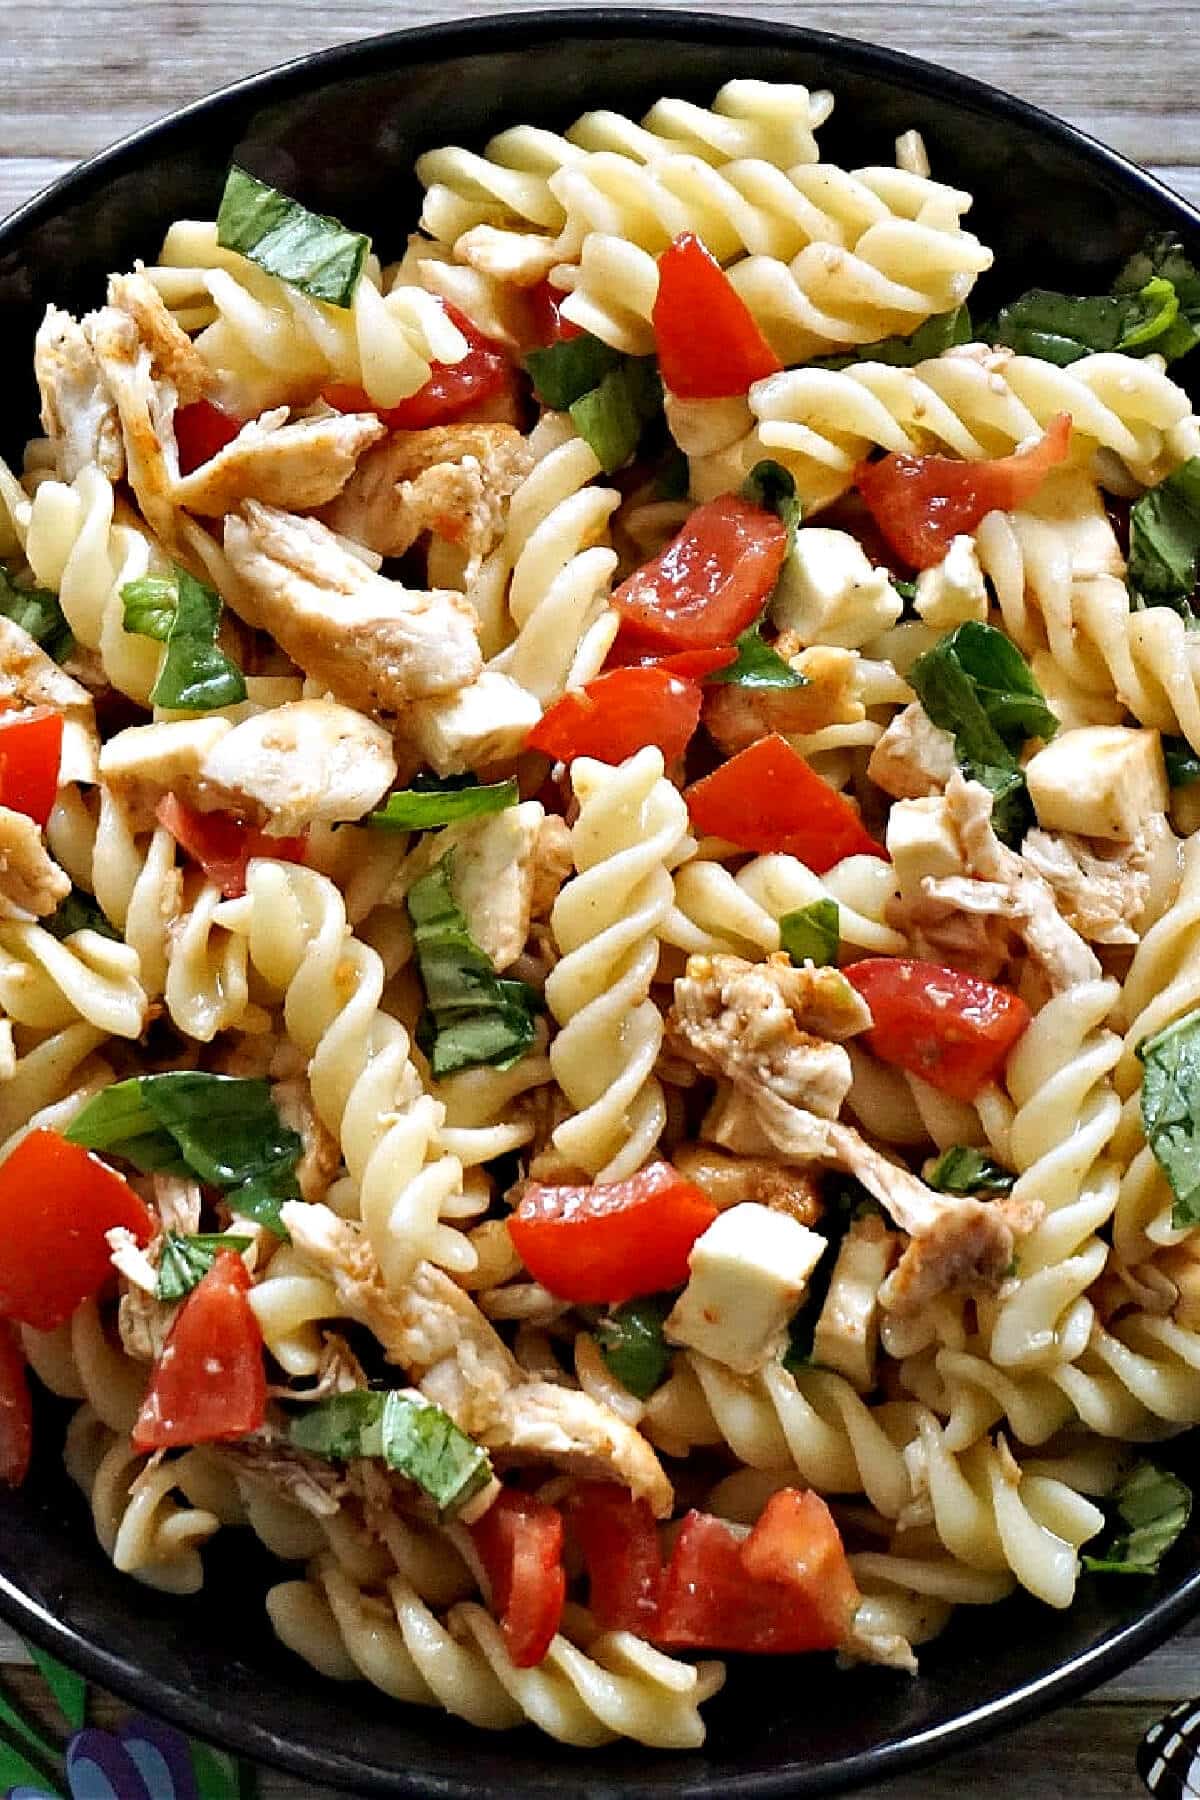 Close-up shoot of a plate with pasta salad.